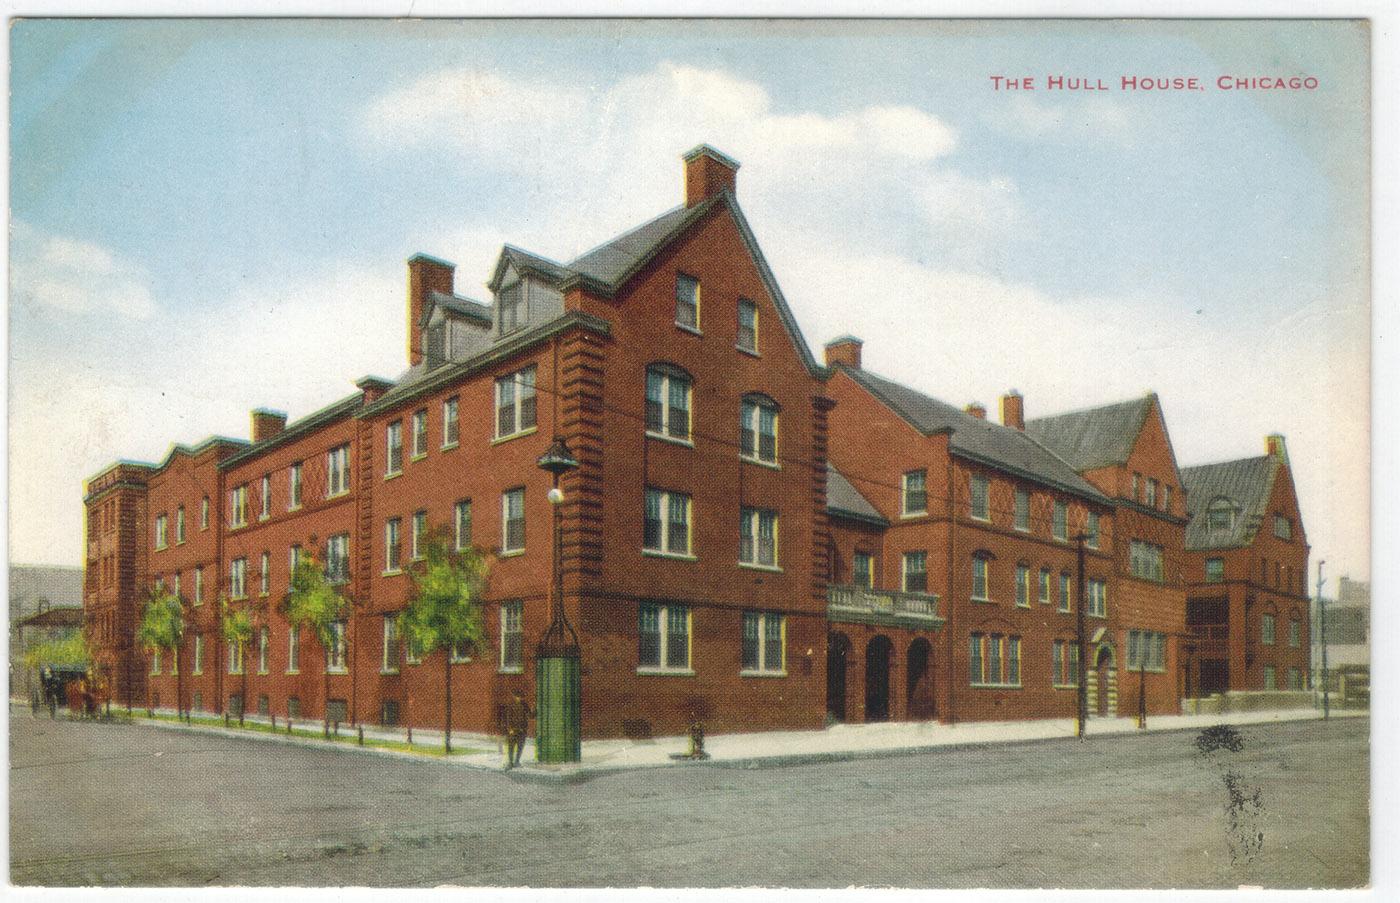 Jane Addams founded Hull House in 1889 to address the problems of the immigrant poor on Chicago's West Side